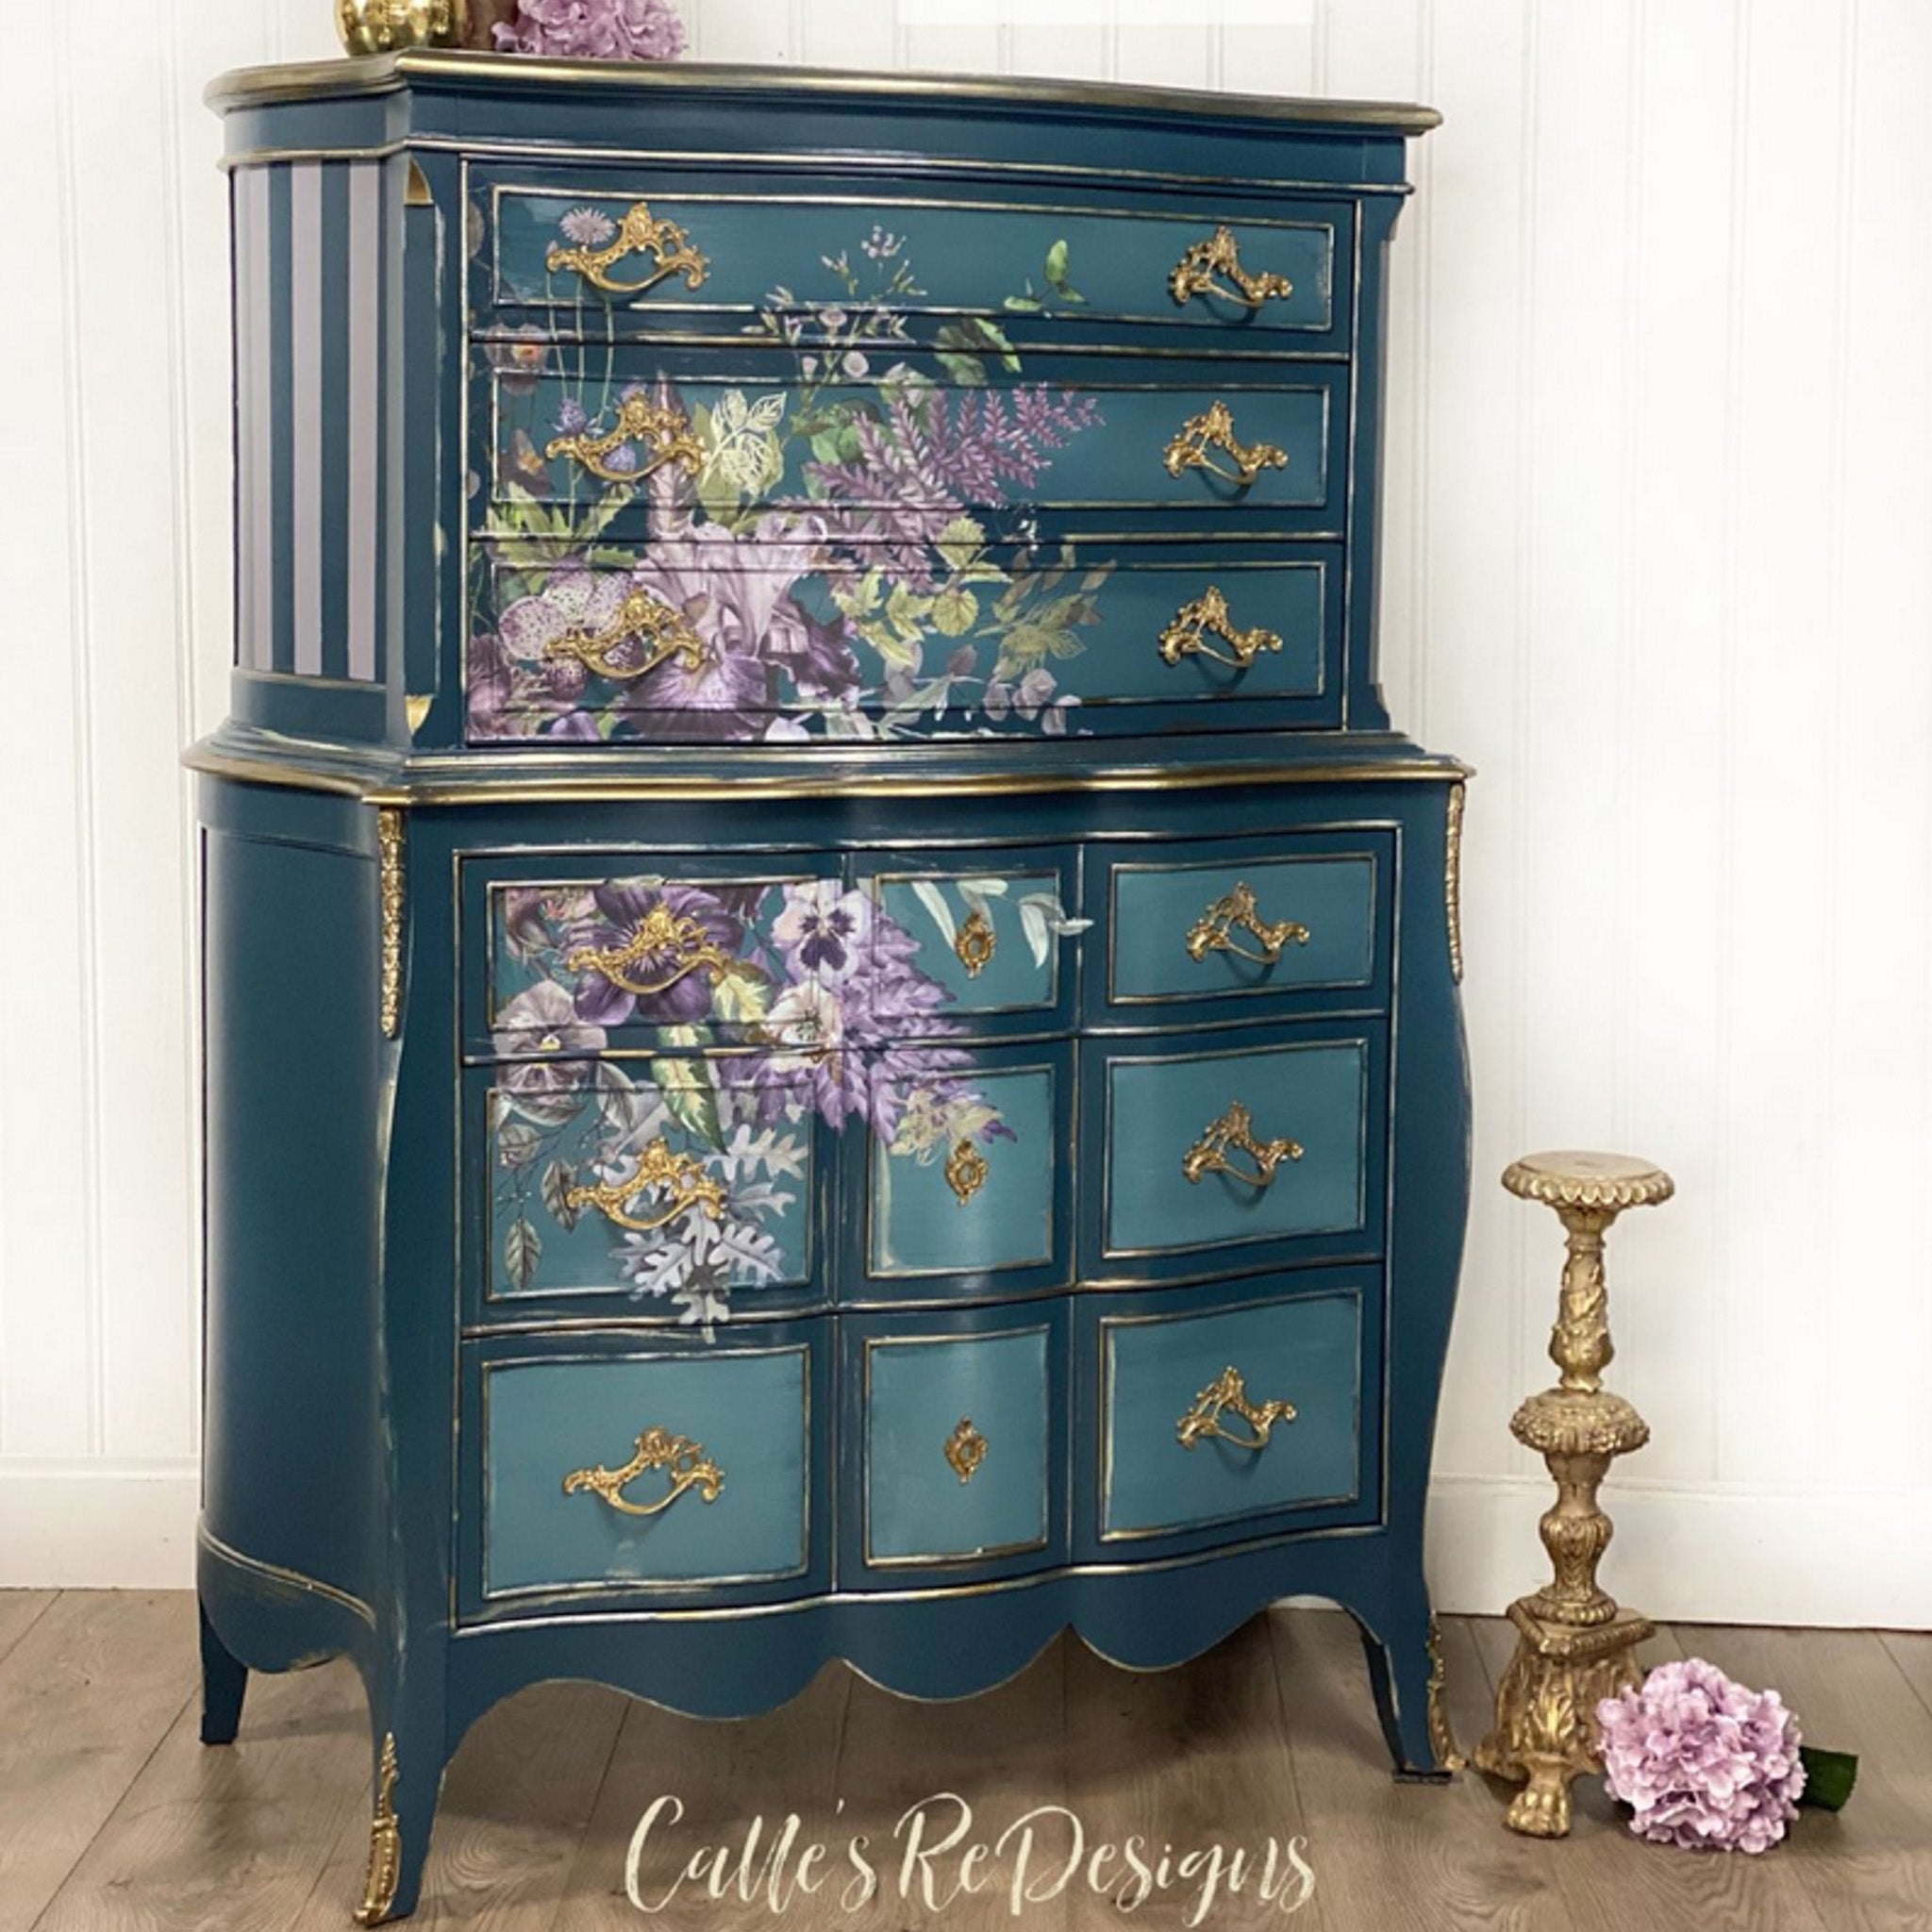 A vintage lingerie dresser refurbished by Calle's ReDesigns is painted blue with gold accents and features ReDesign with Prima's Vigorous Violet transfer on it.